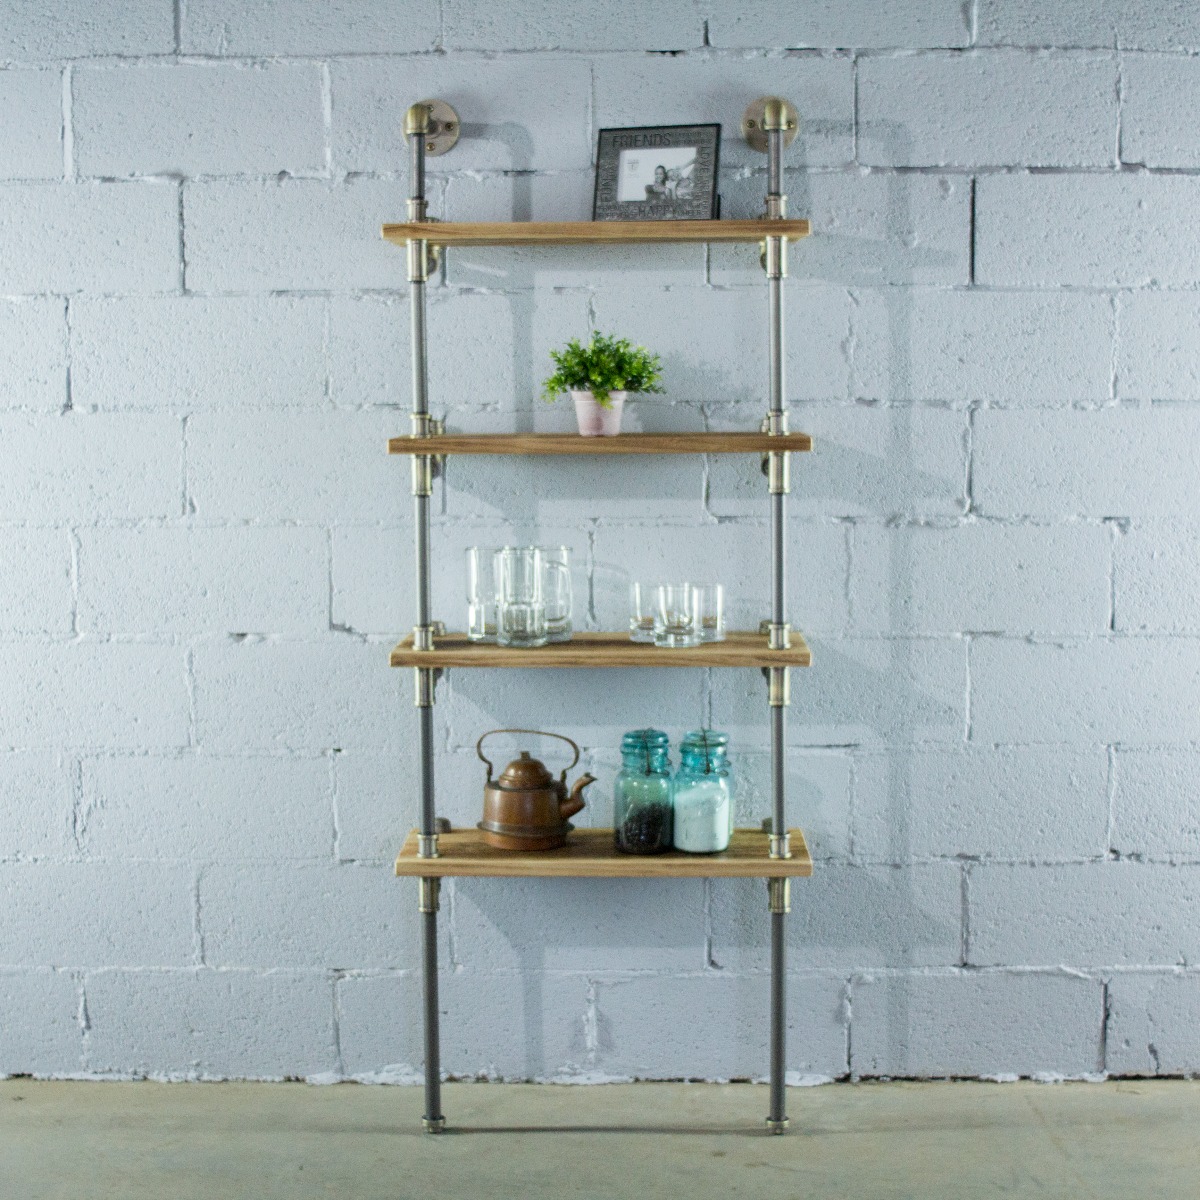 Twbs1-br-gr-na 27 In. Sacramento Industrial Chic Wide 4-tier Etagere Bookcase, Brushed Brass Gray Steel Combo With Natural Stained Wood